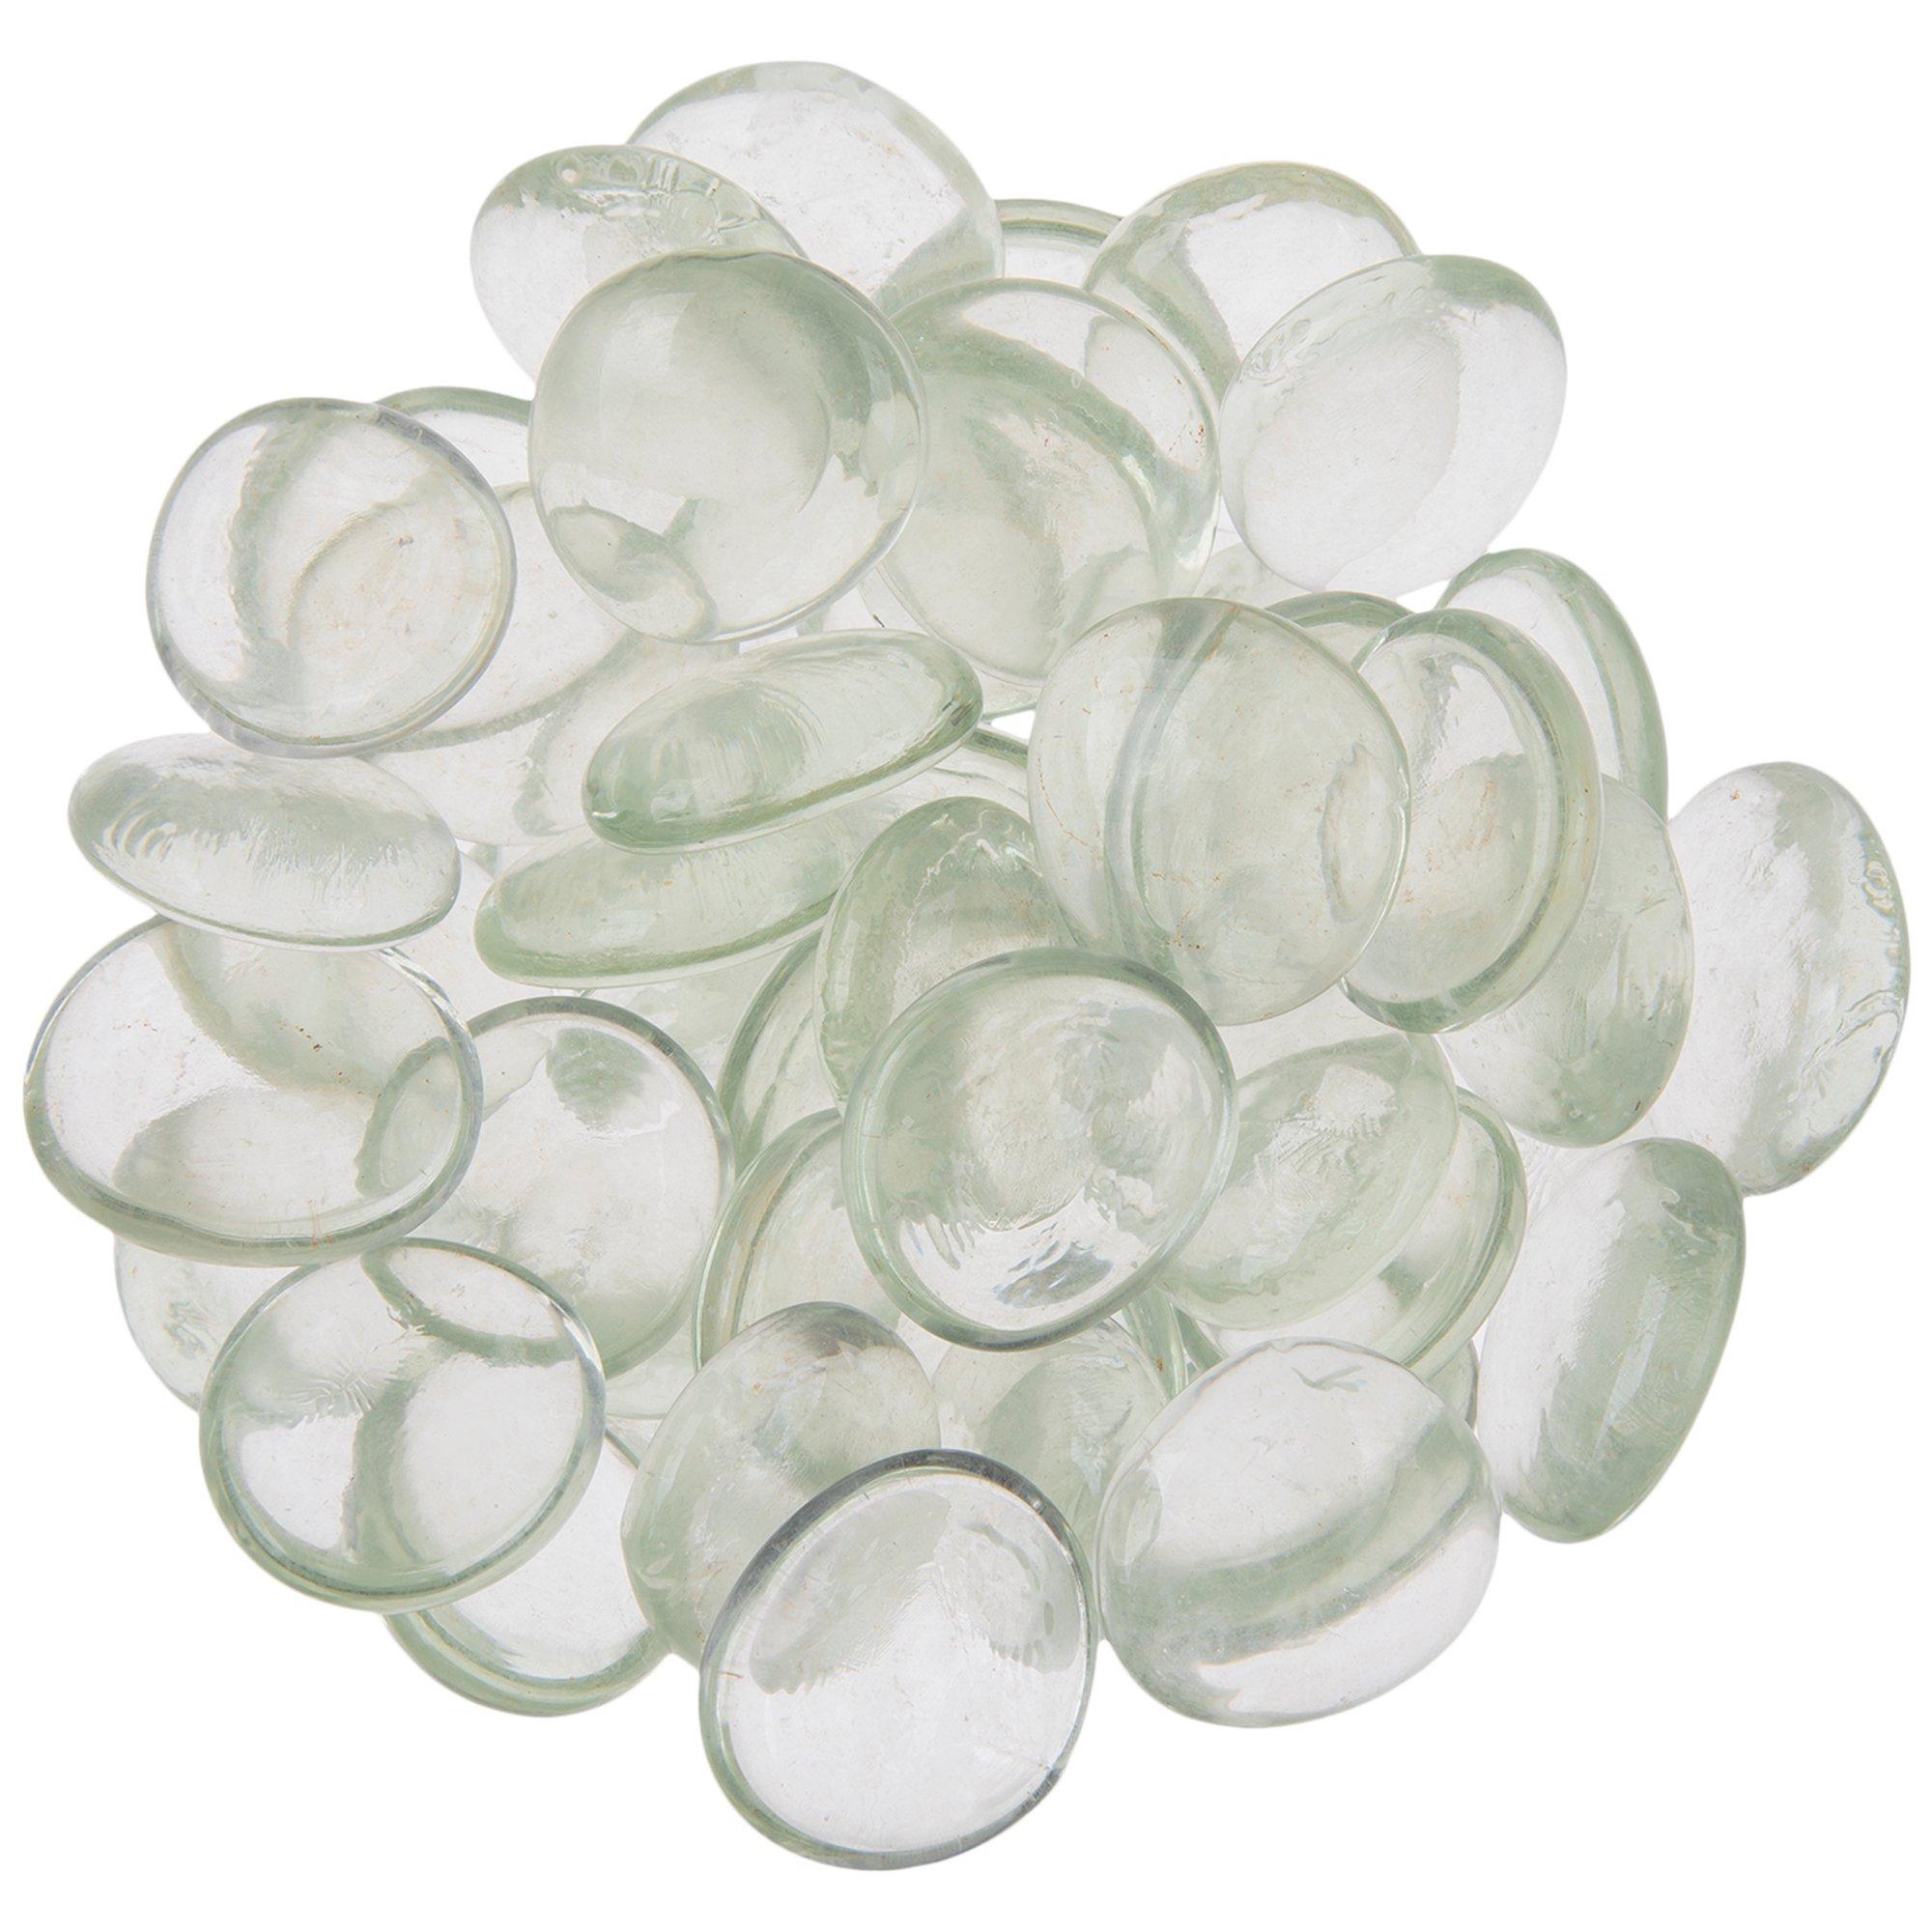 5/8 Cat Eyes - 50 Pieces Glass Domed Pebbles Flat Marbles for Mosaics  Jewelry